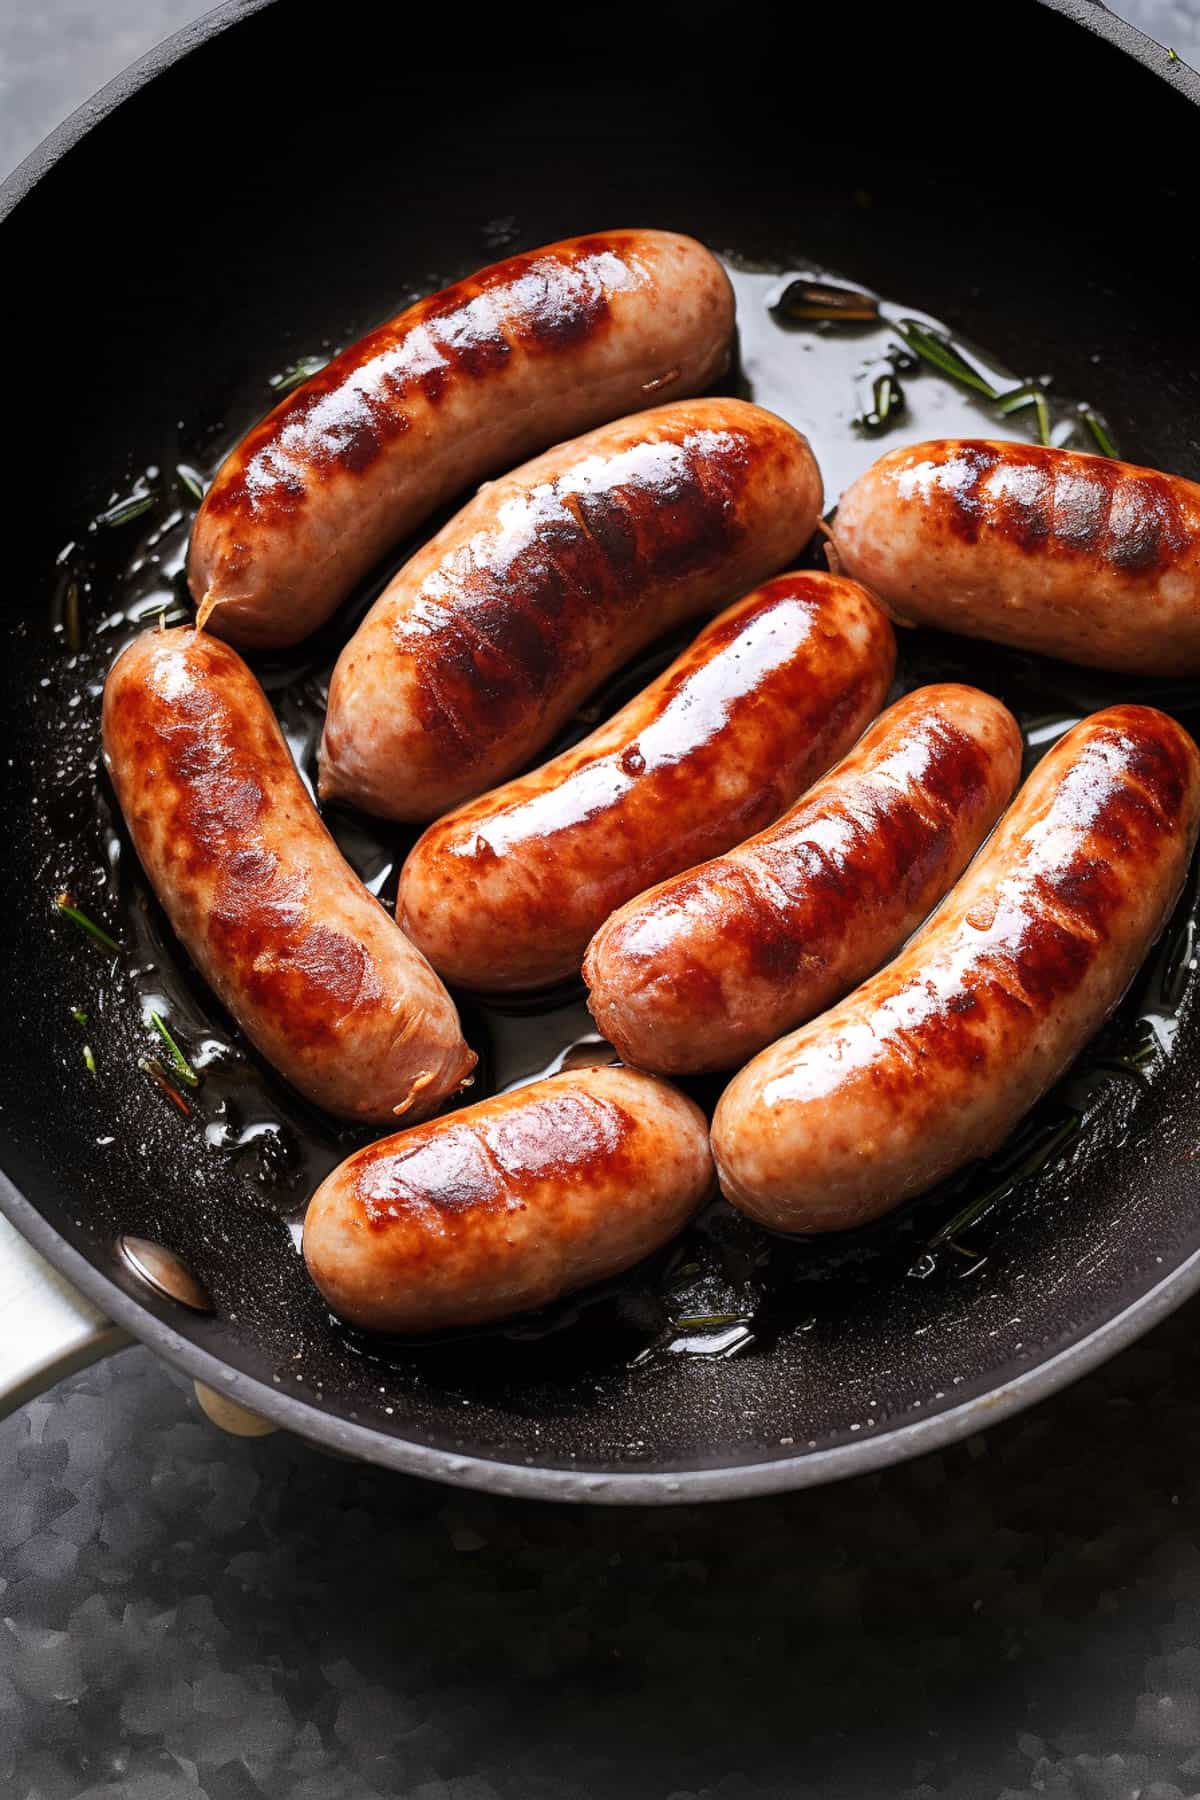 Sausages being browned in a pan for casserole.